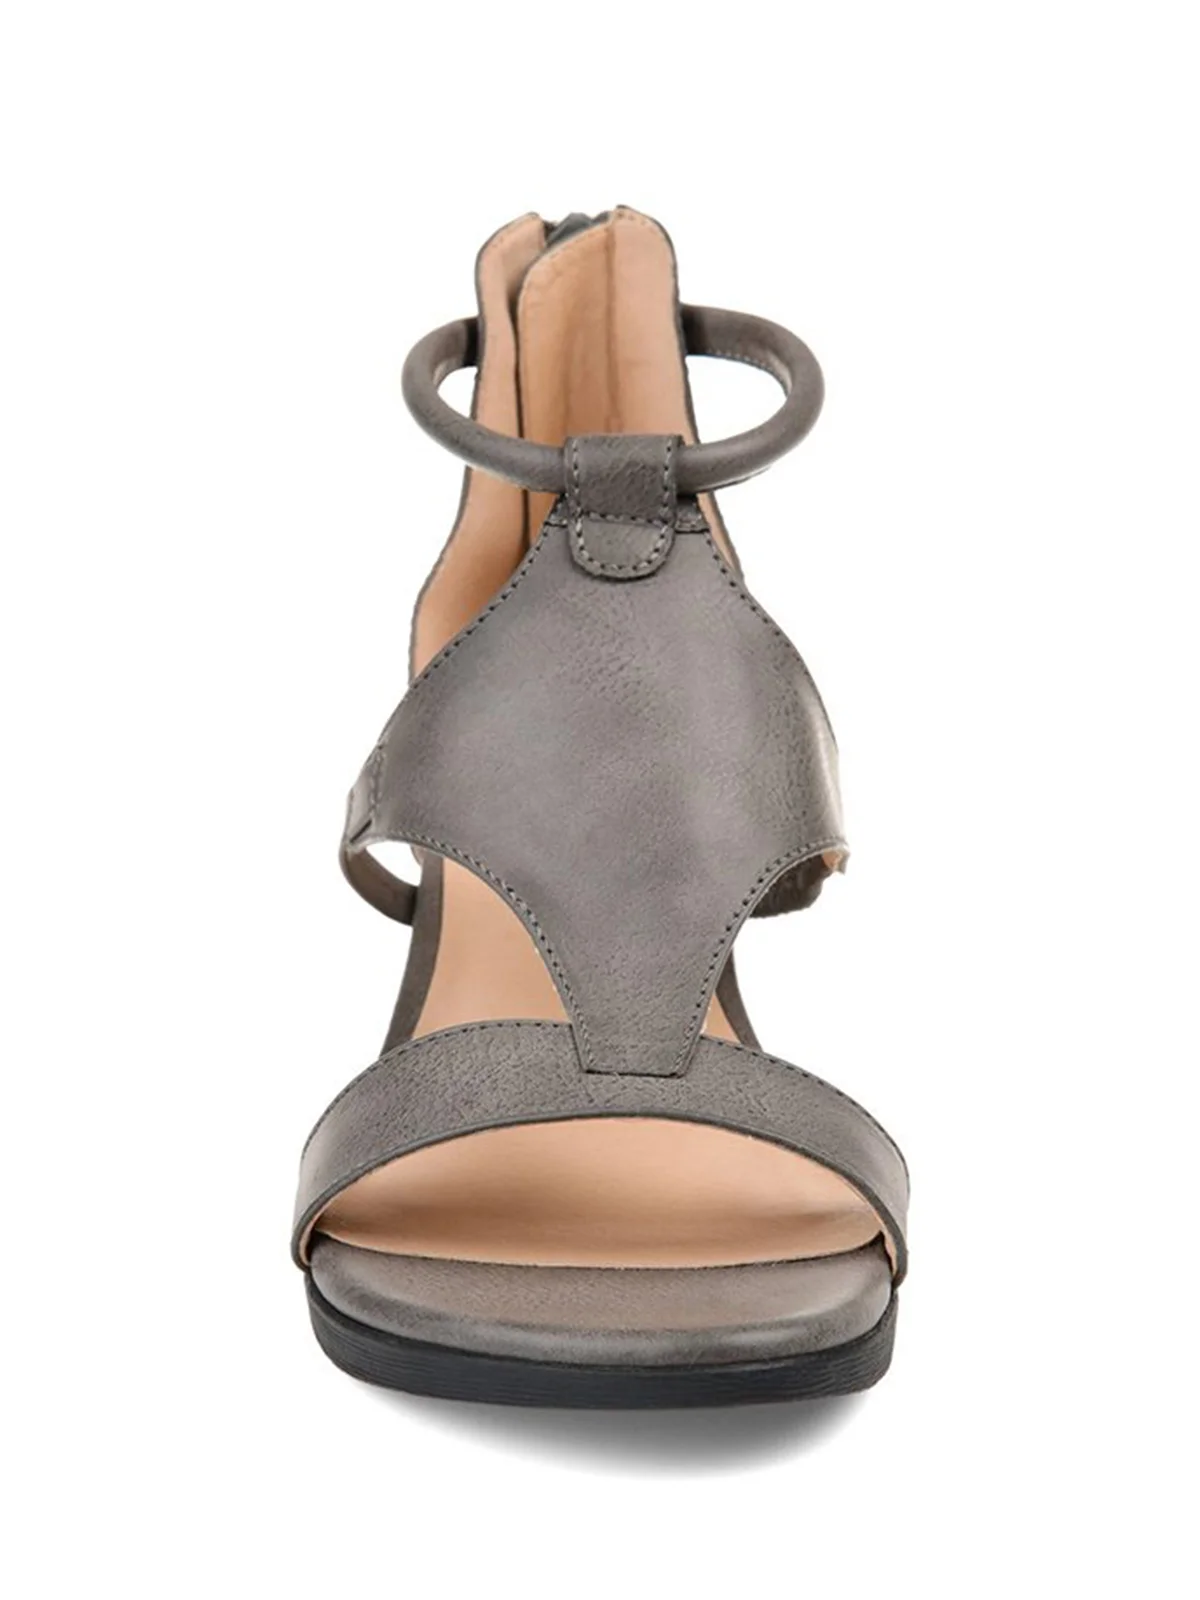 zolucky Women Casual Leather Comfy Wedge Sandals